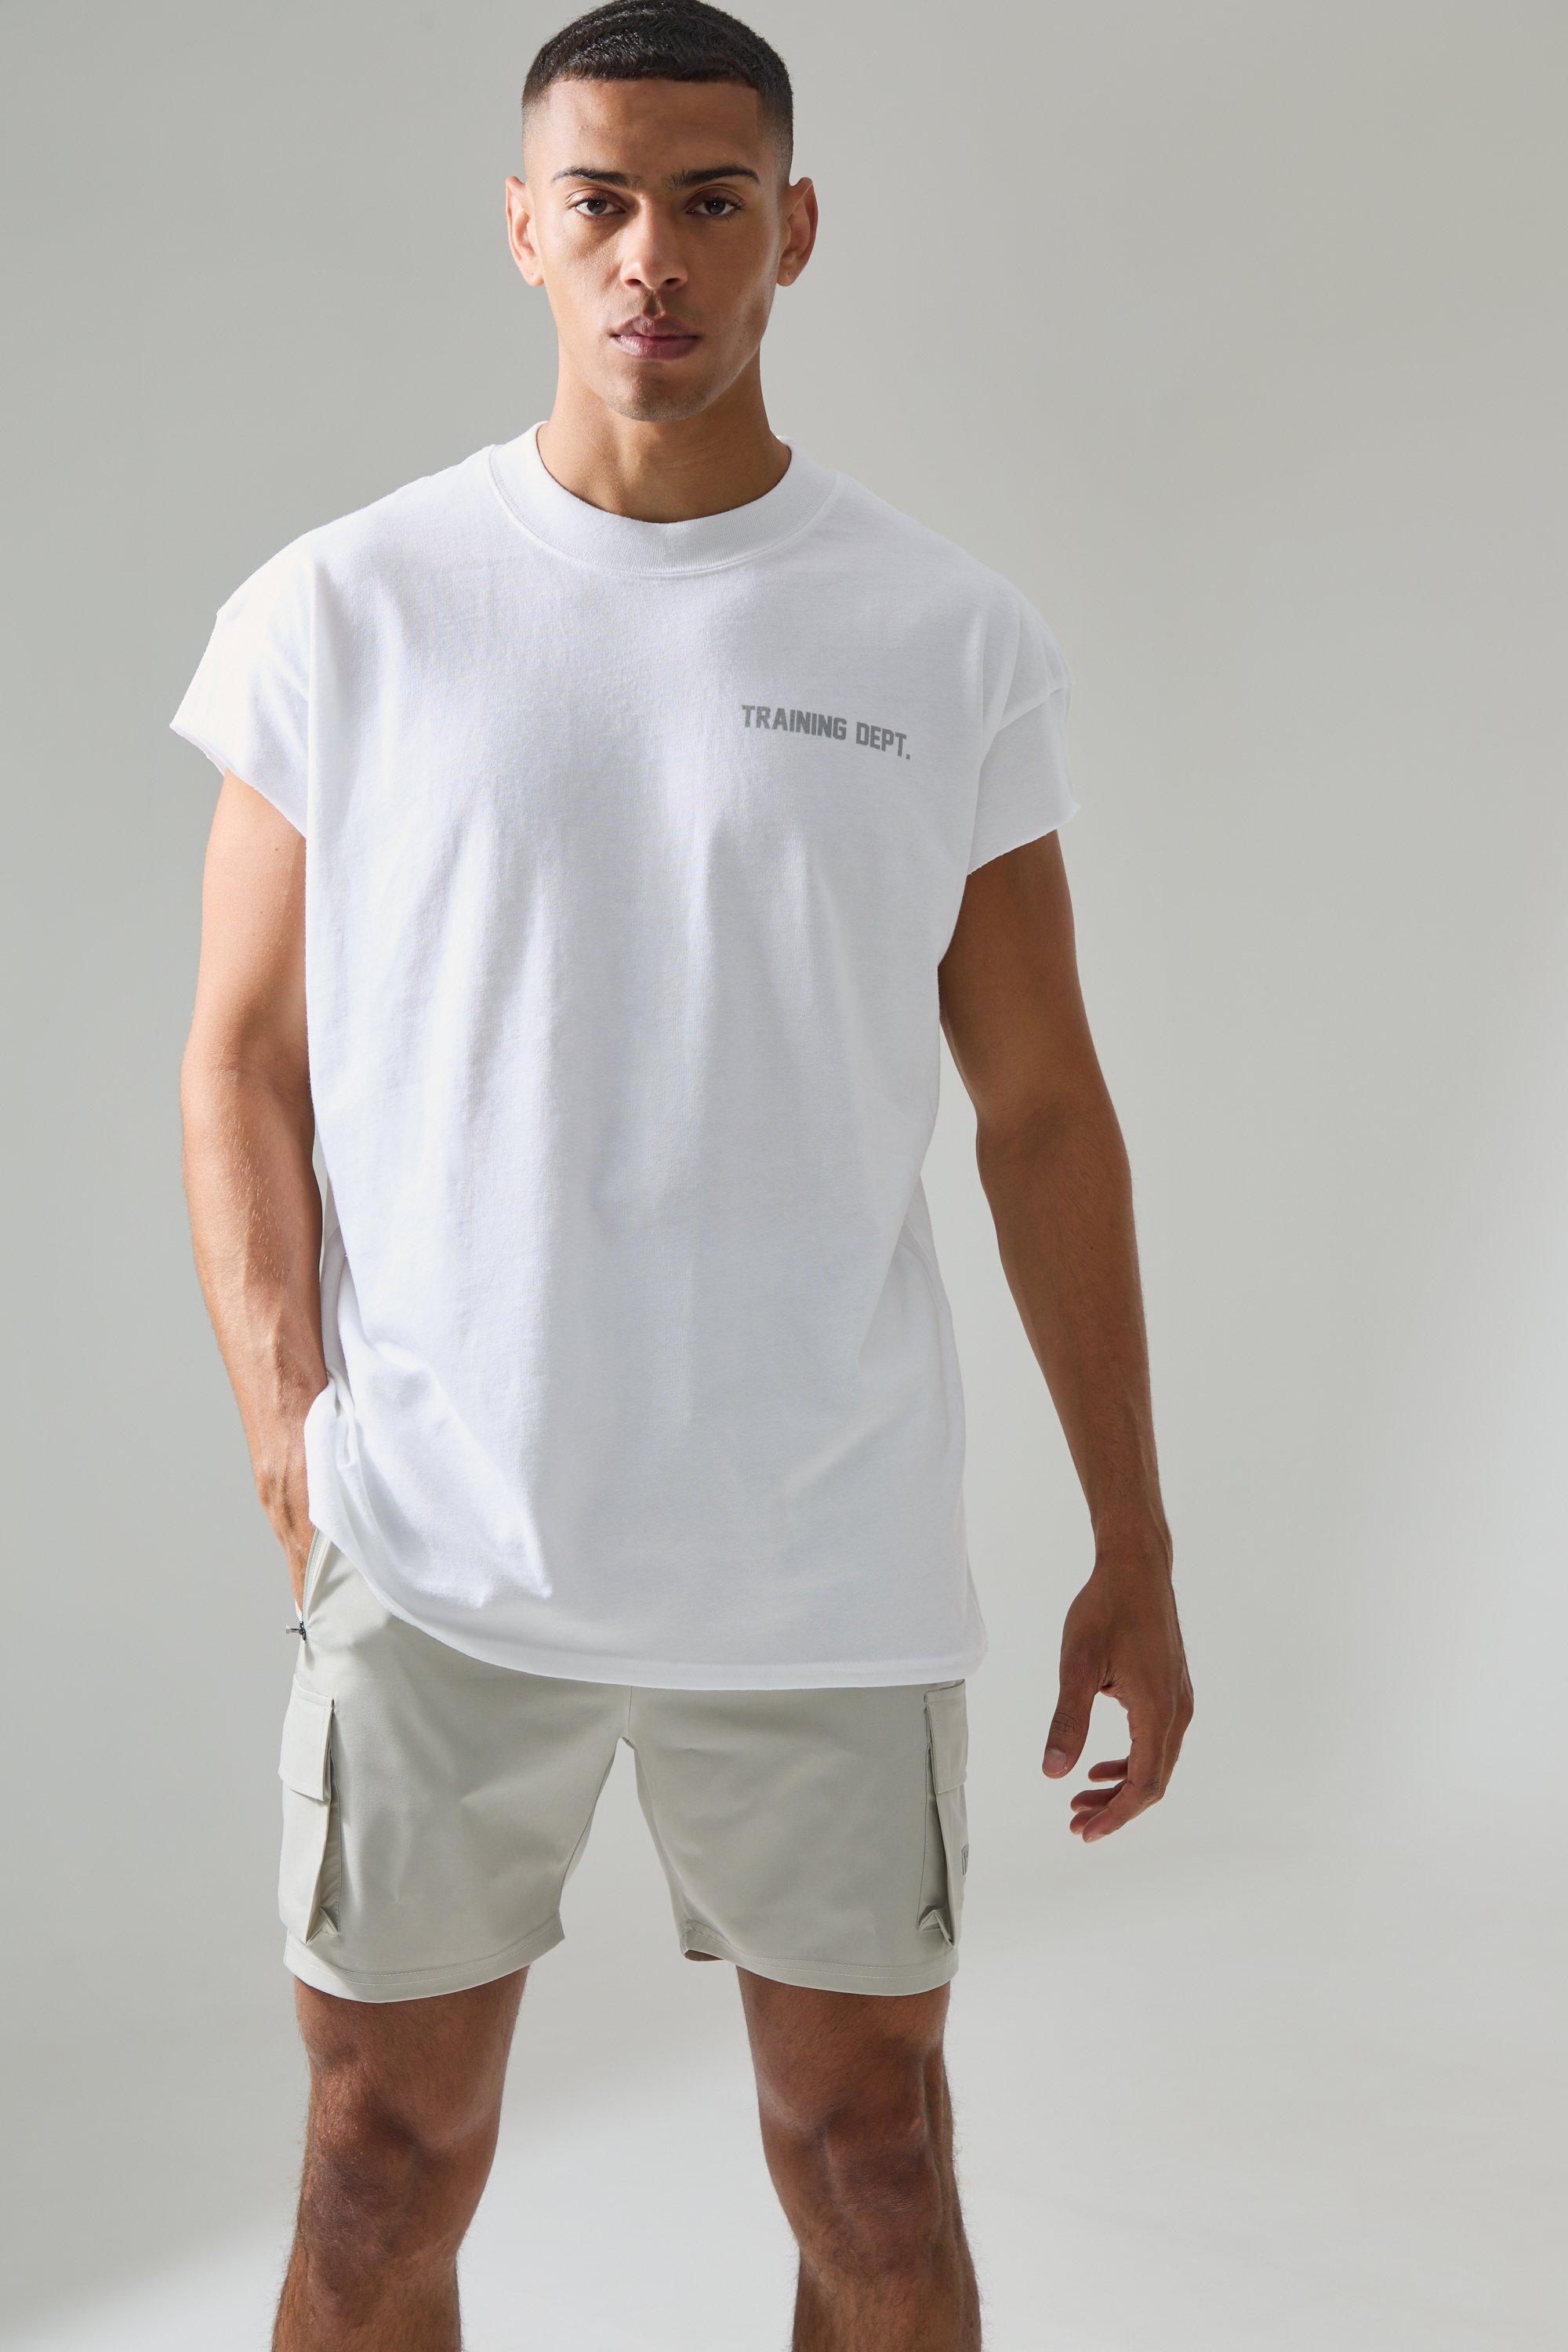 Image of Active Training Dept Oversized Extended Neck Cut Off T-shirt, Bianco